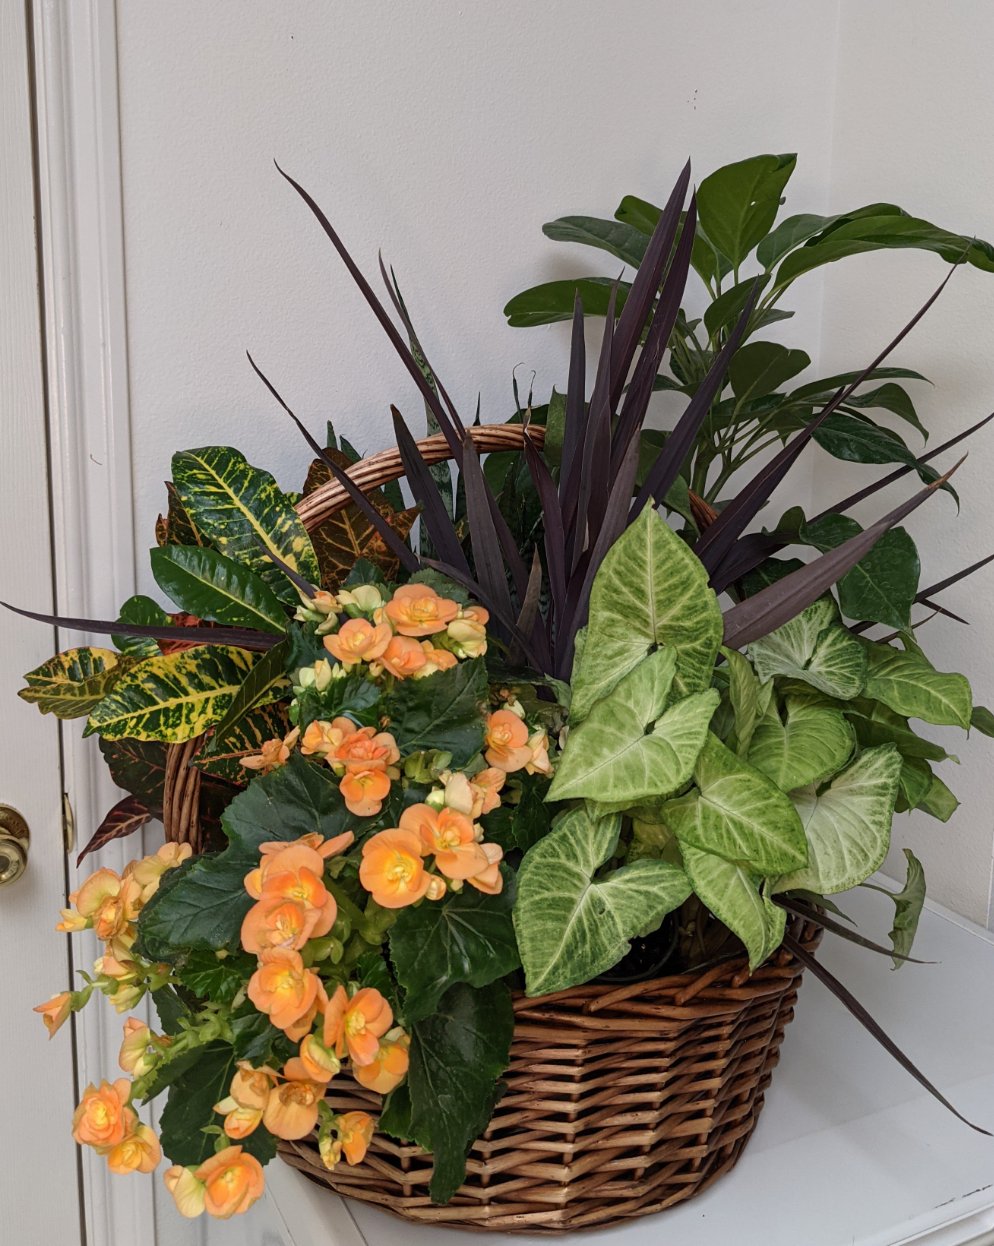 This arrangment features various green plants with many different textures. Some of the featured plants are an orange blooming begonia, caladium, croton, dracenea, and schfelera. 